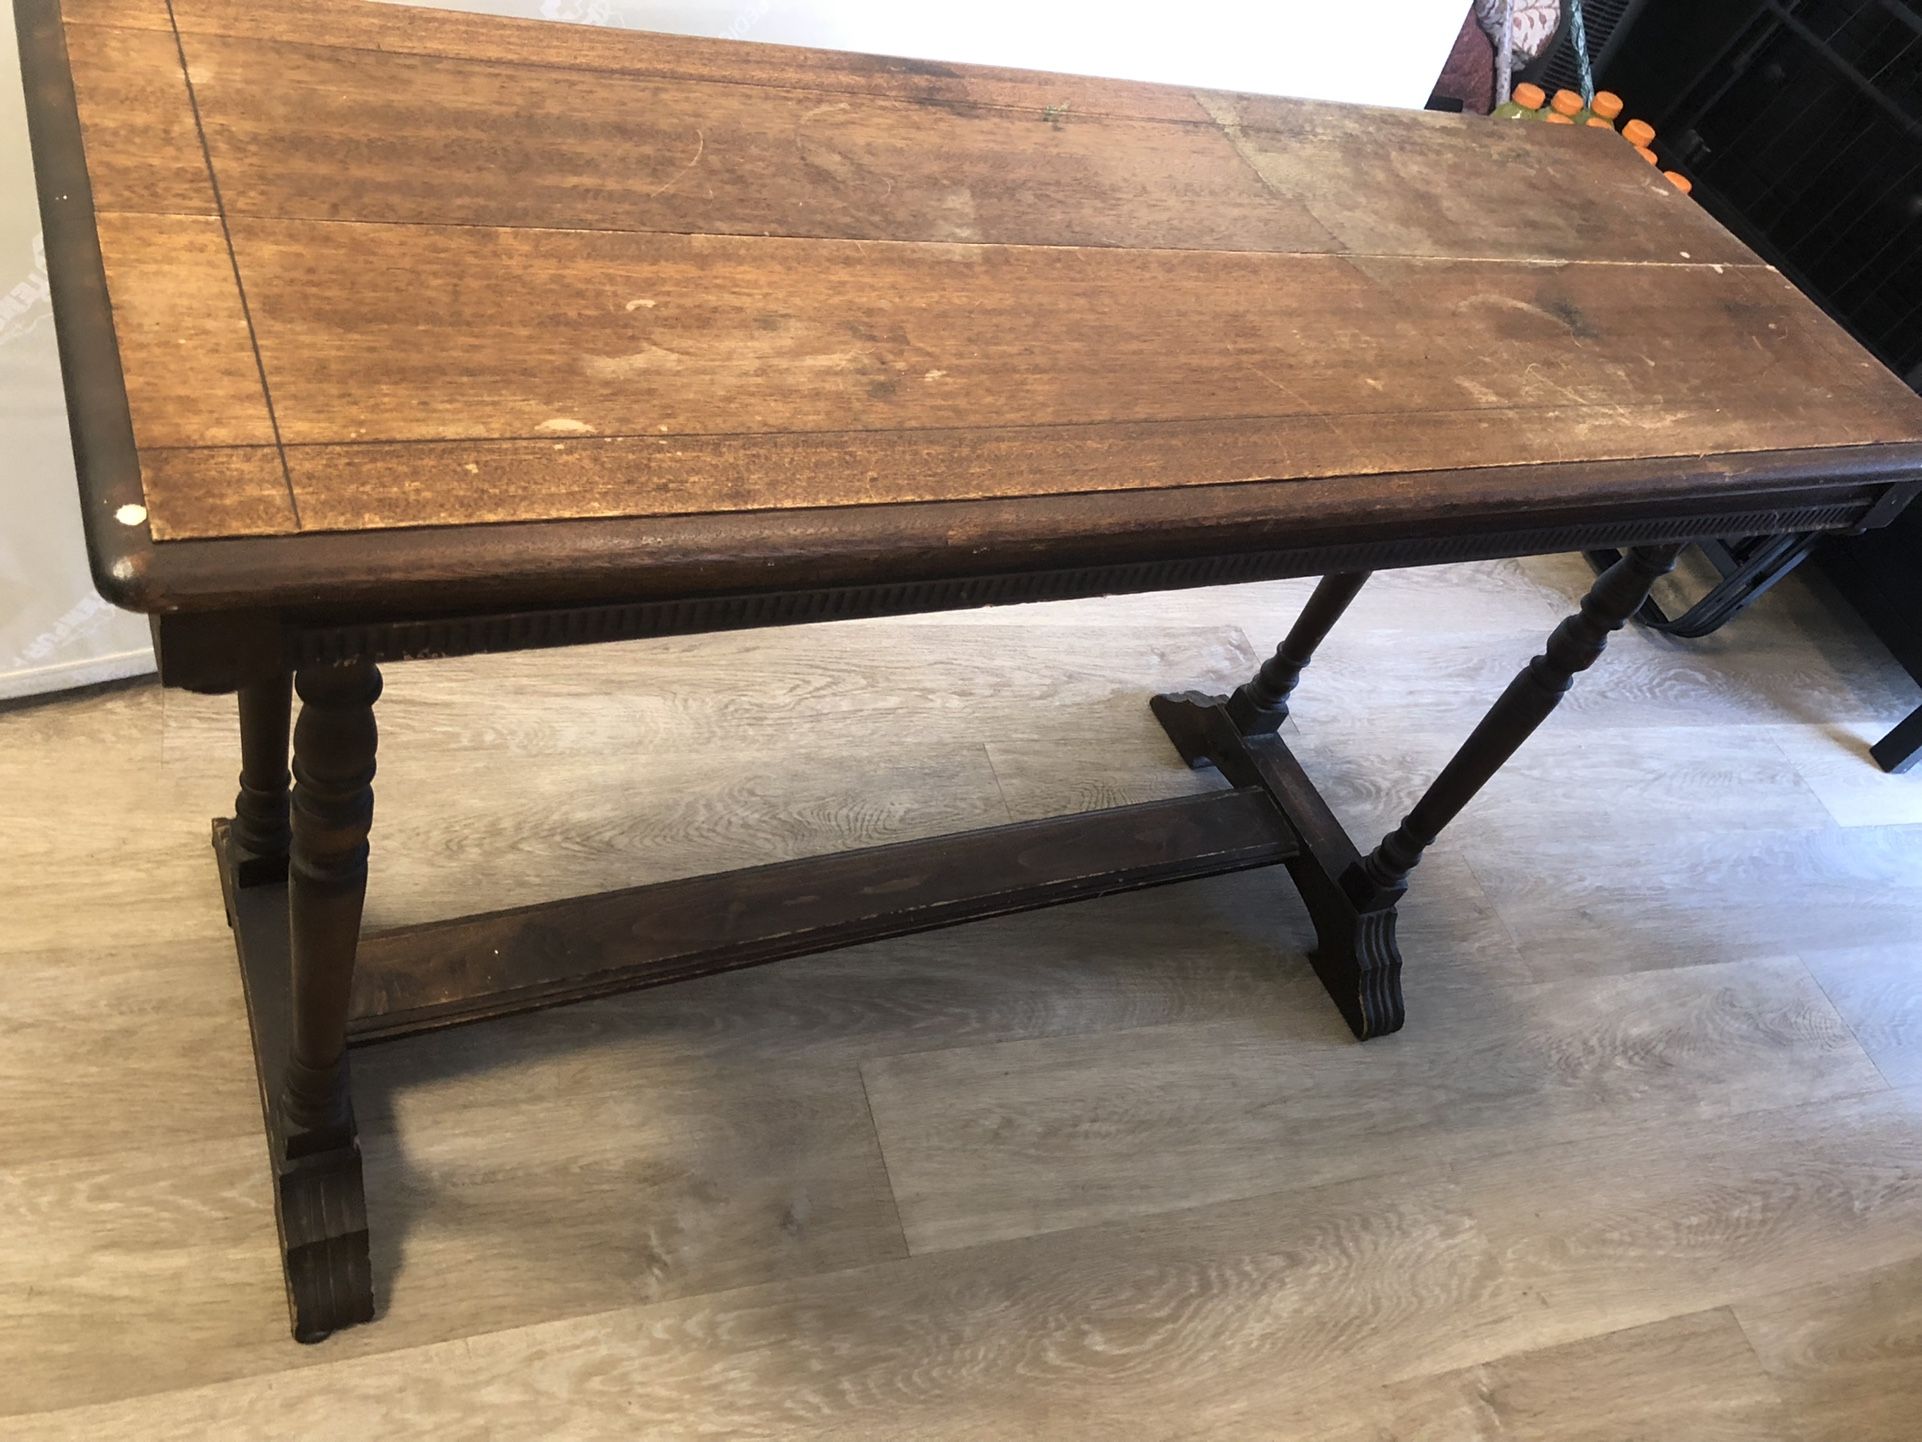 Antique Rustic Entry Table Medium Size Perfect For A Small Place 